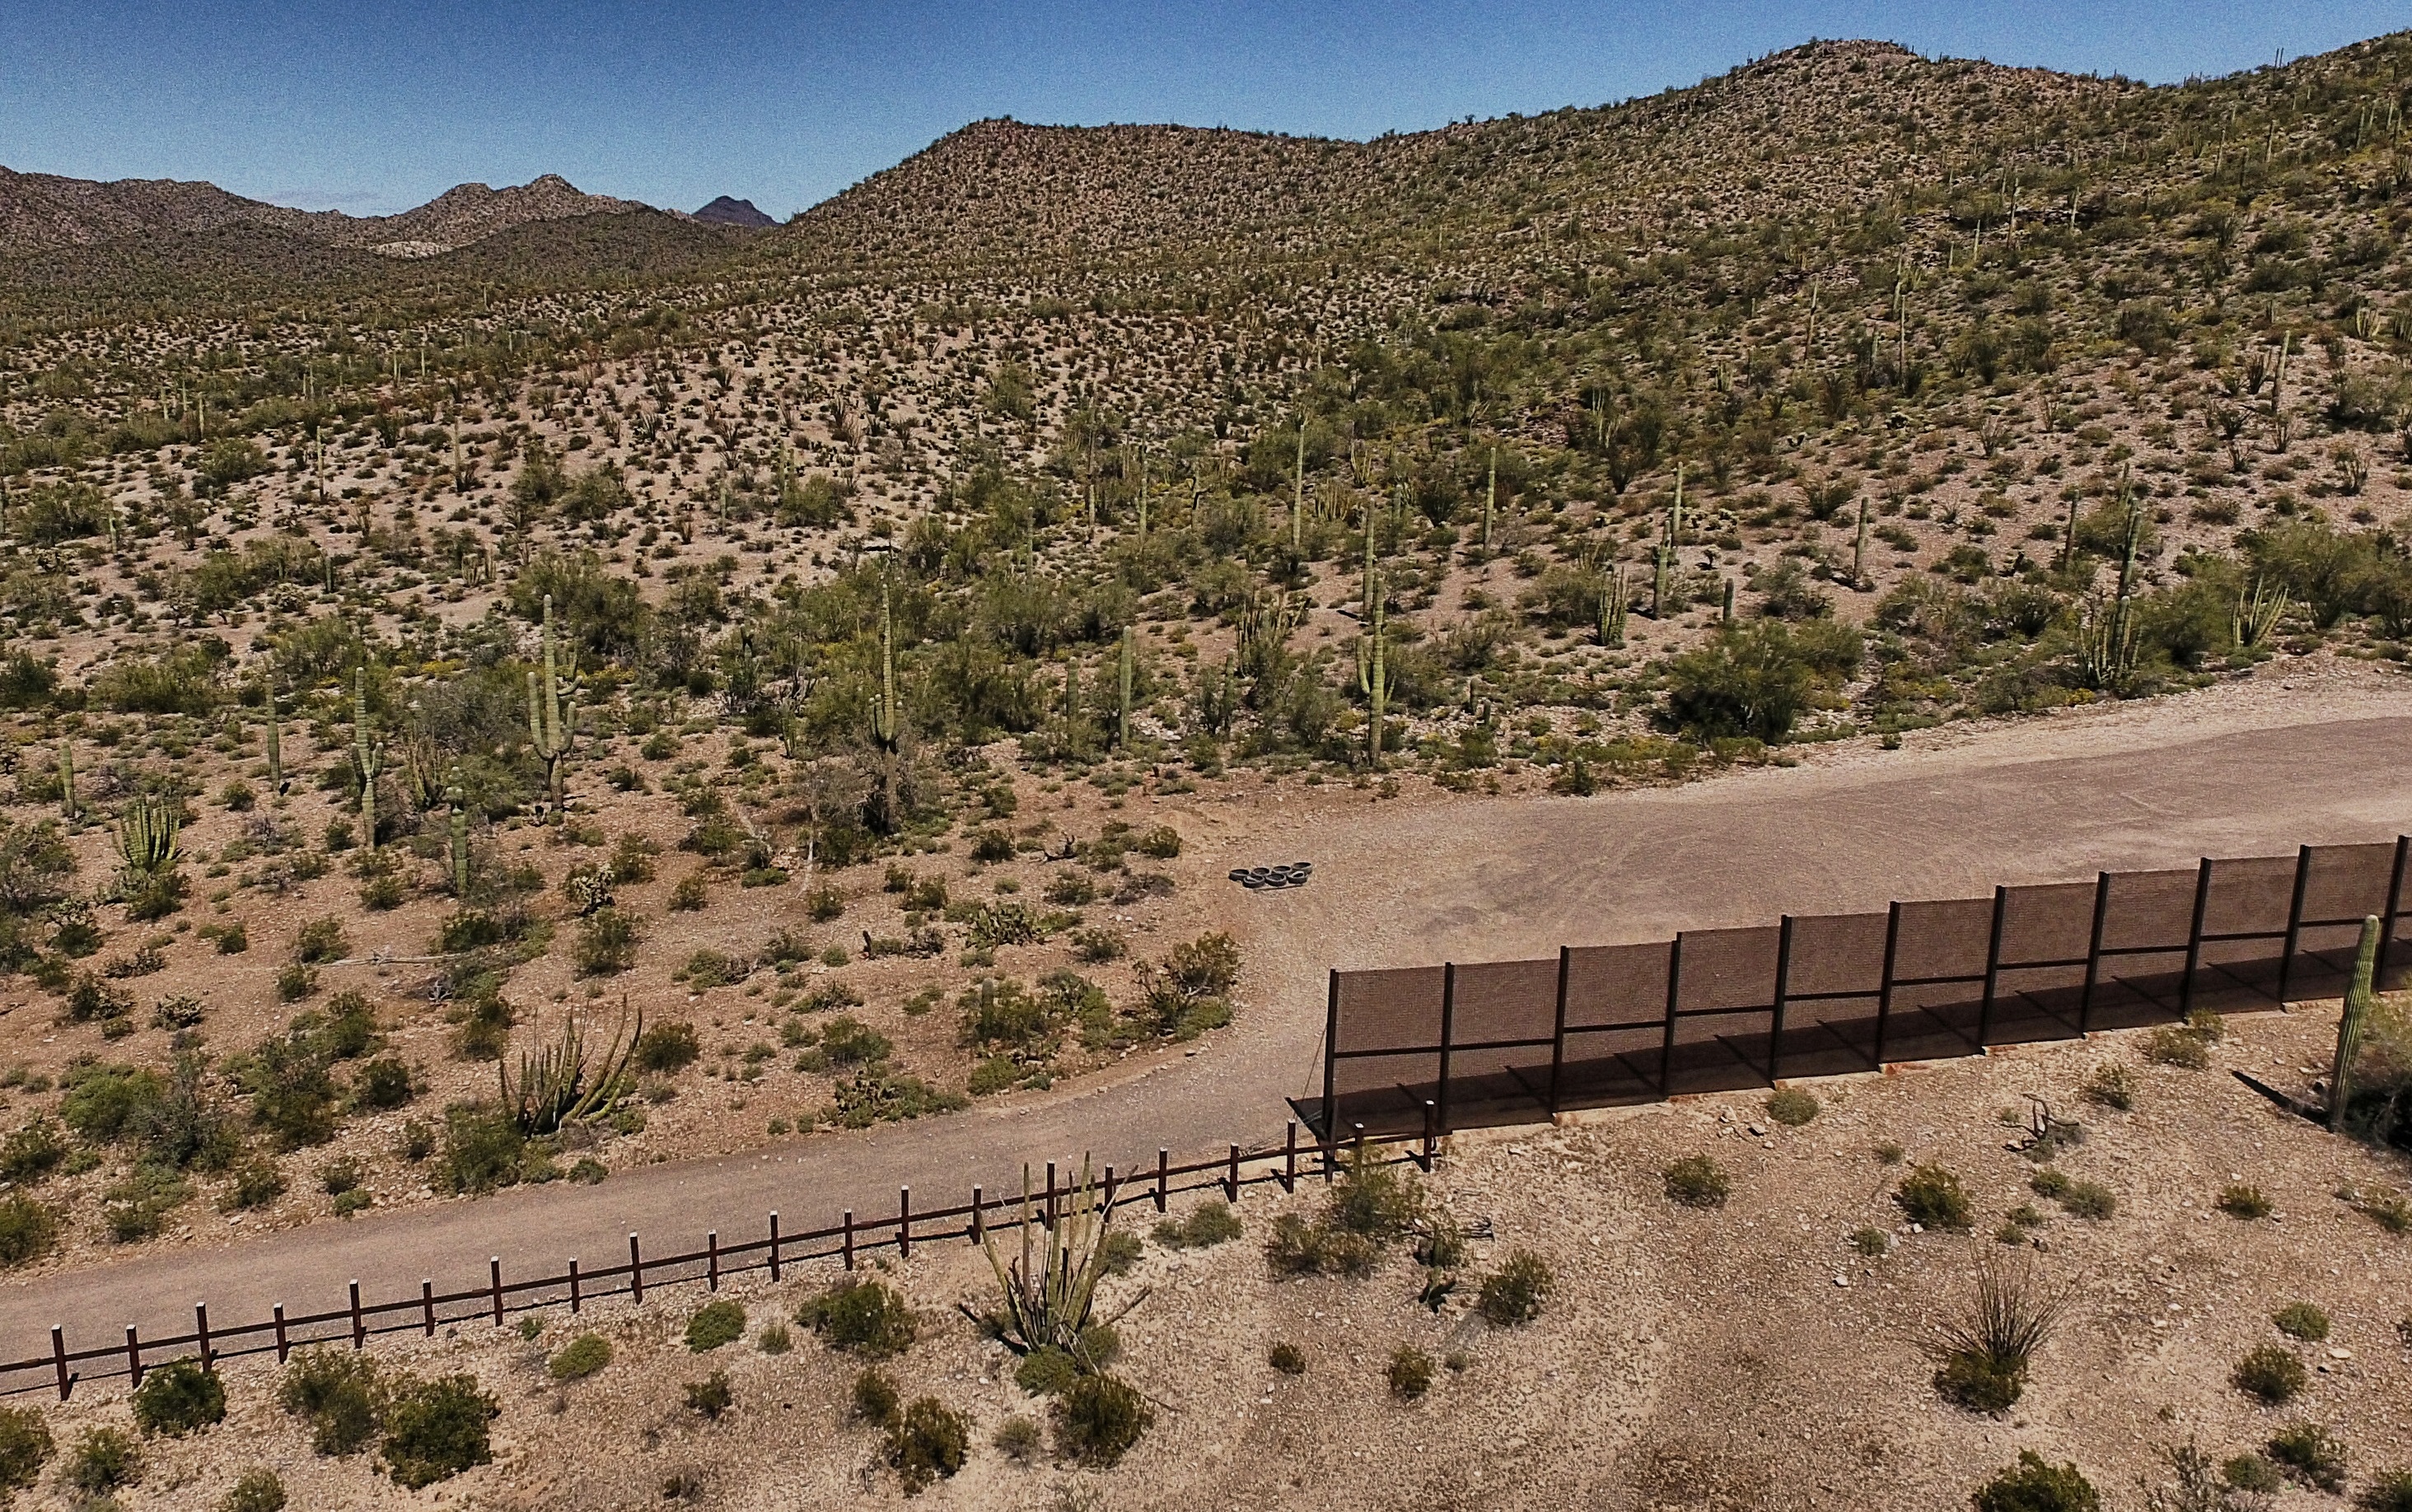 View of the metal fence along the border in Sonoyta, Sonora state, northern Mexico, between the Altar desert in Mexico and the Arizona desert in the United States, on March 27, 2017. PEDRO PARDO&mdash;AFP/Getty Images (PEDRO PARDO&mdash;AFP/Getty Images)